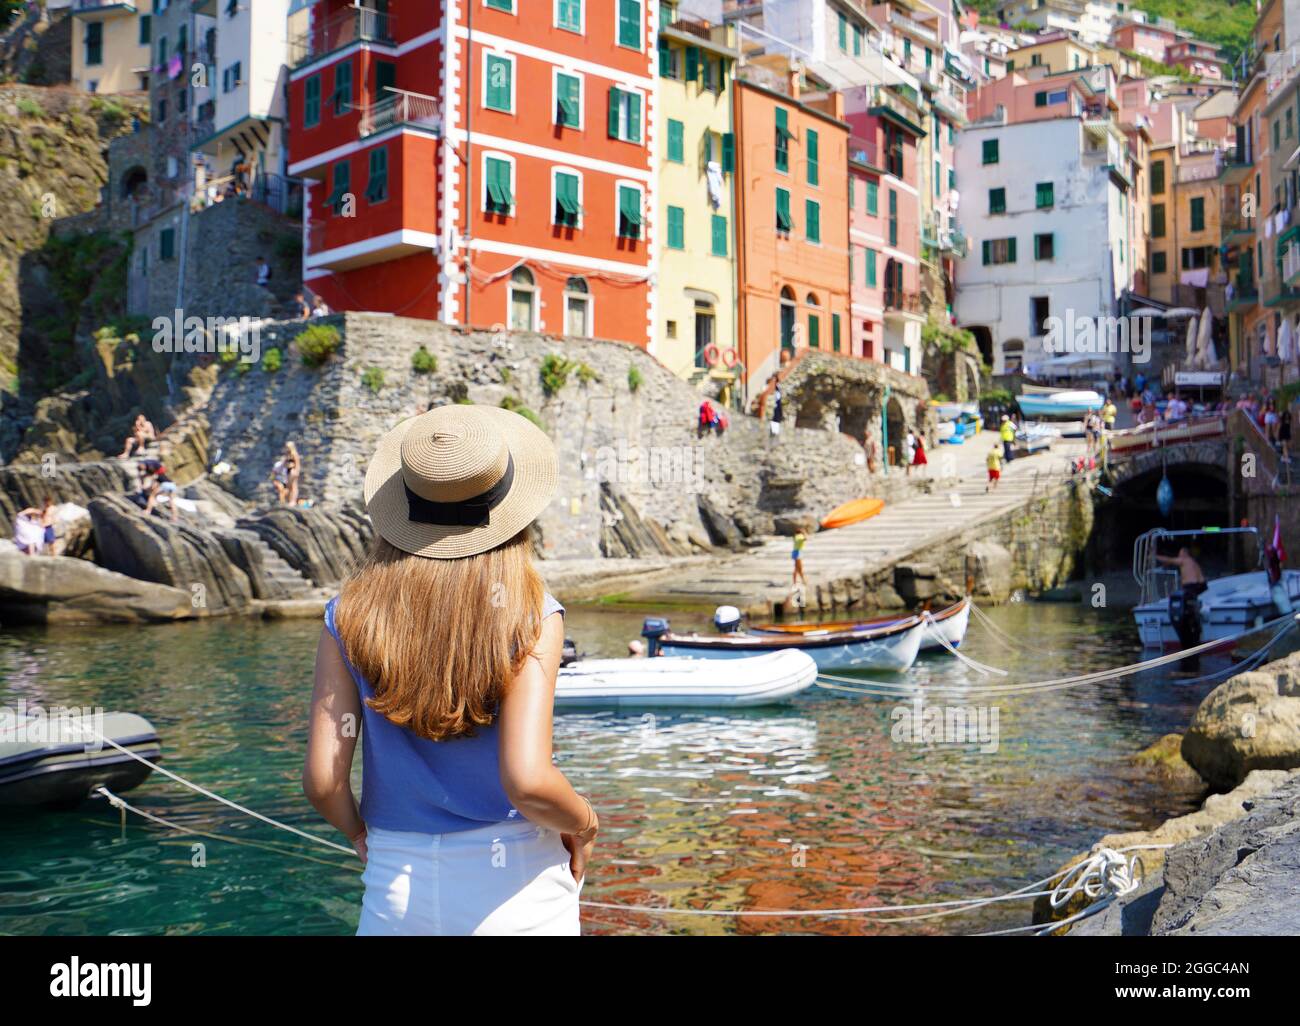 Holidays in Italy. Pretty young woman looking at the village of Riomaggiore from the harbor, Cinque Terre, Italy. Stock Photo